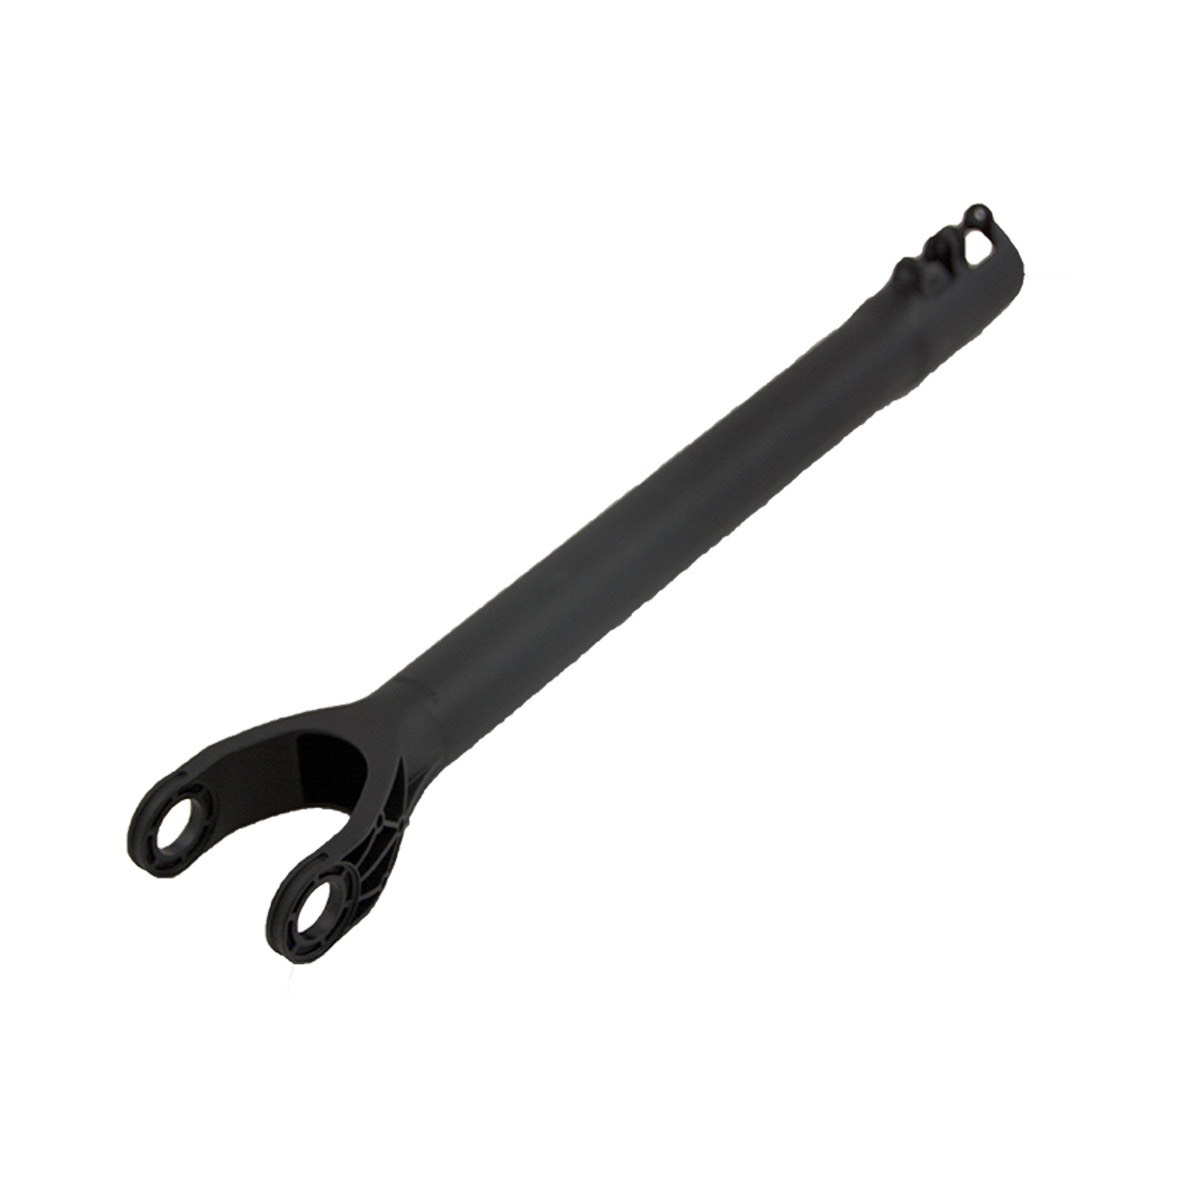 8012-0054, Lower Shaft for GPZ 7000